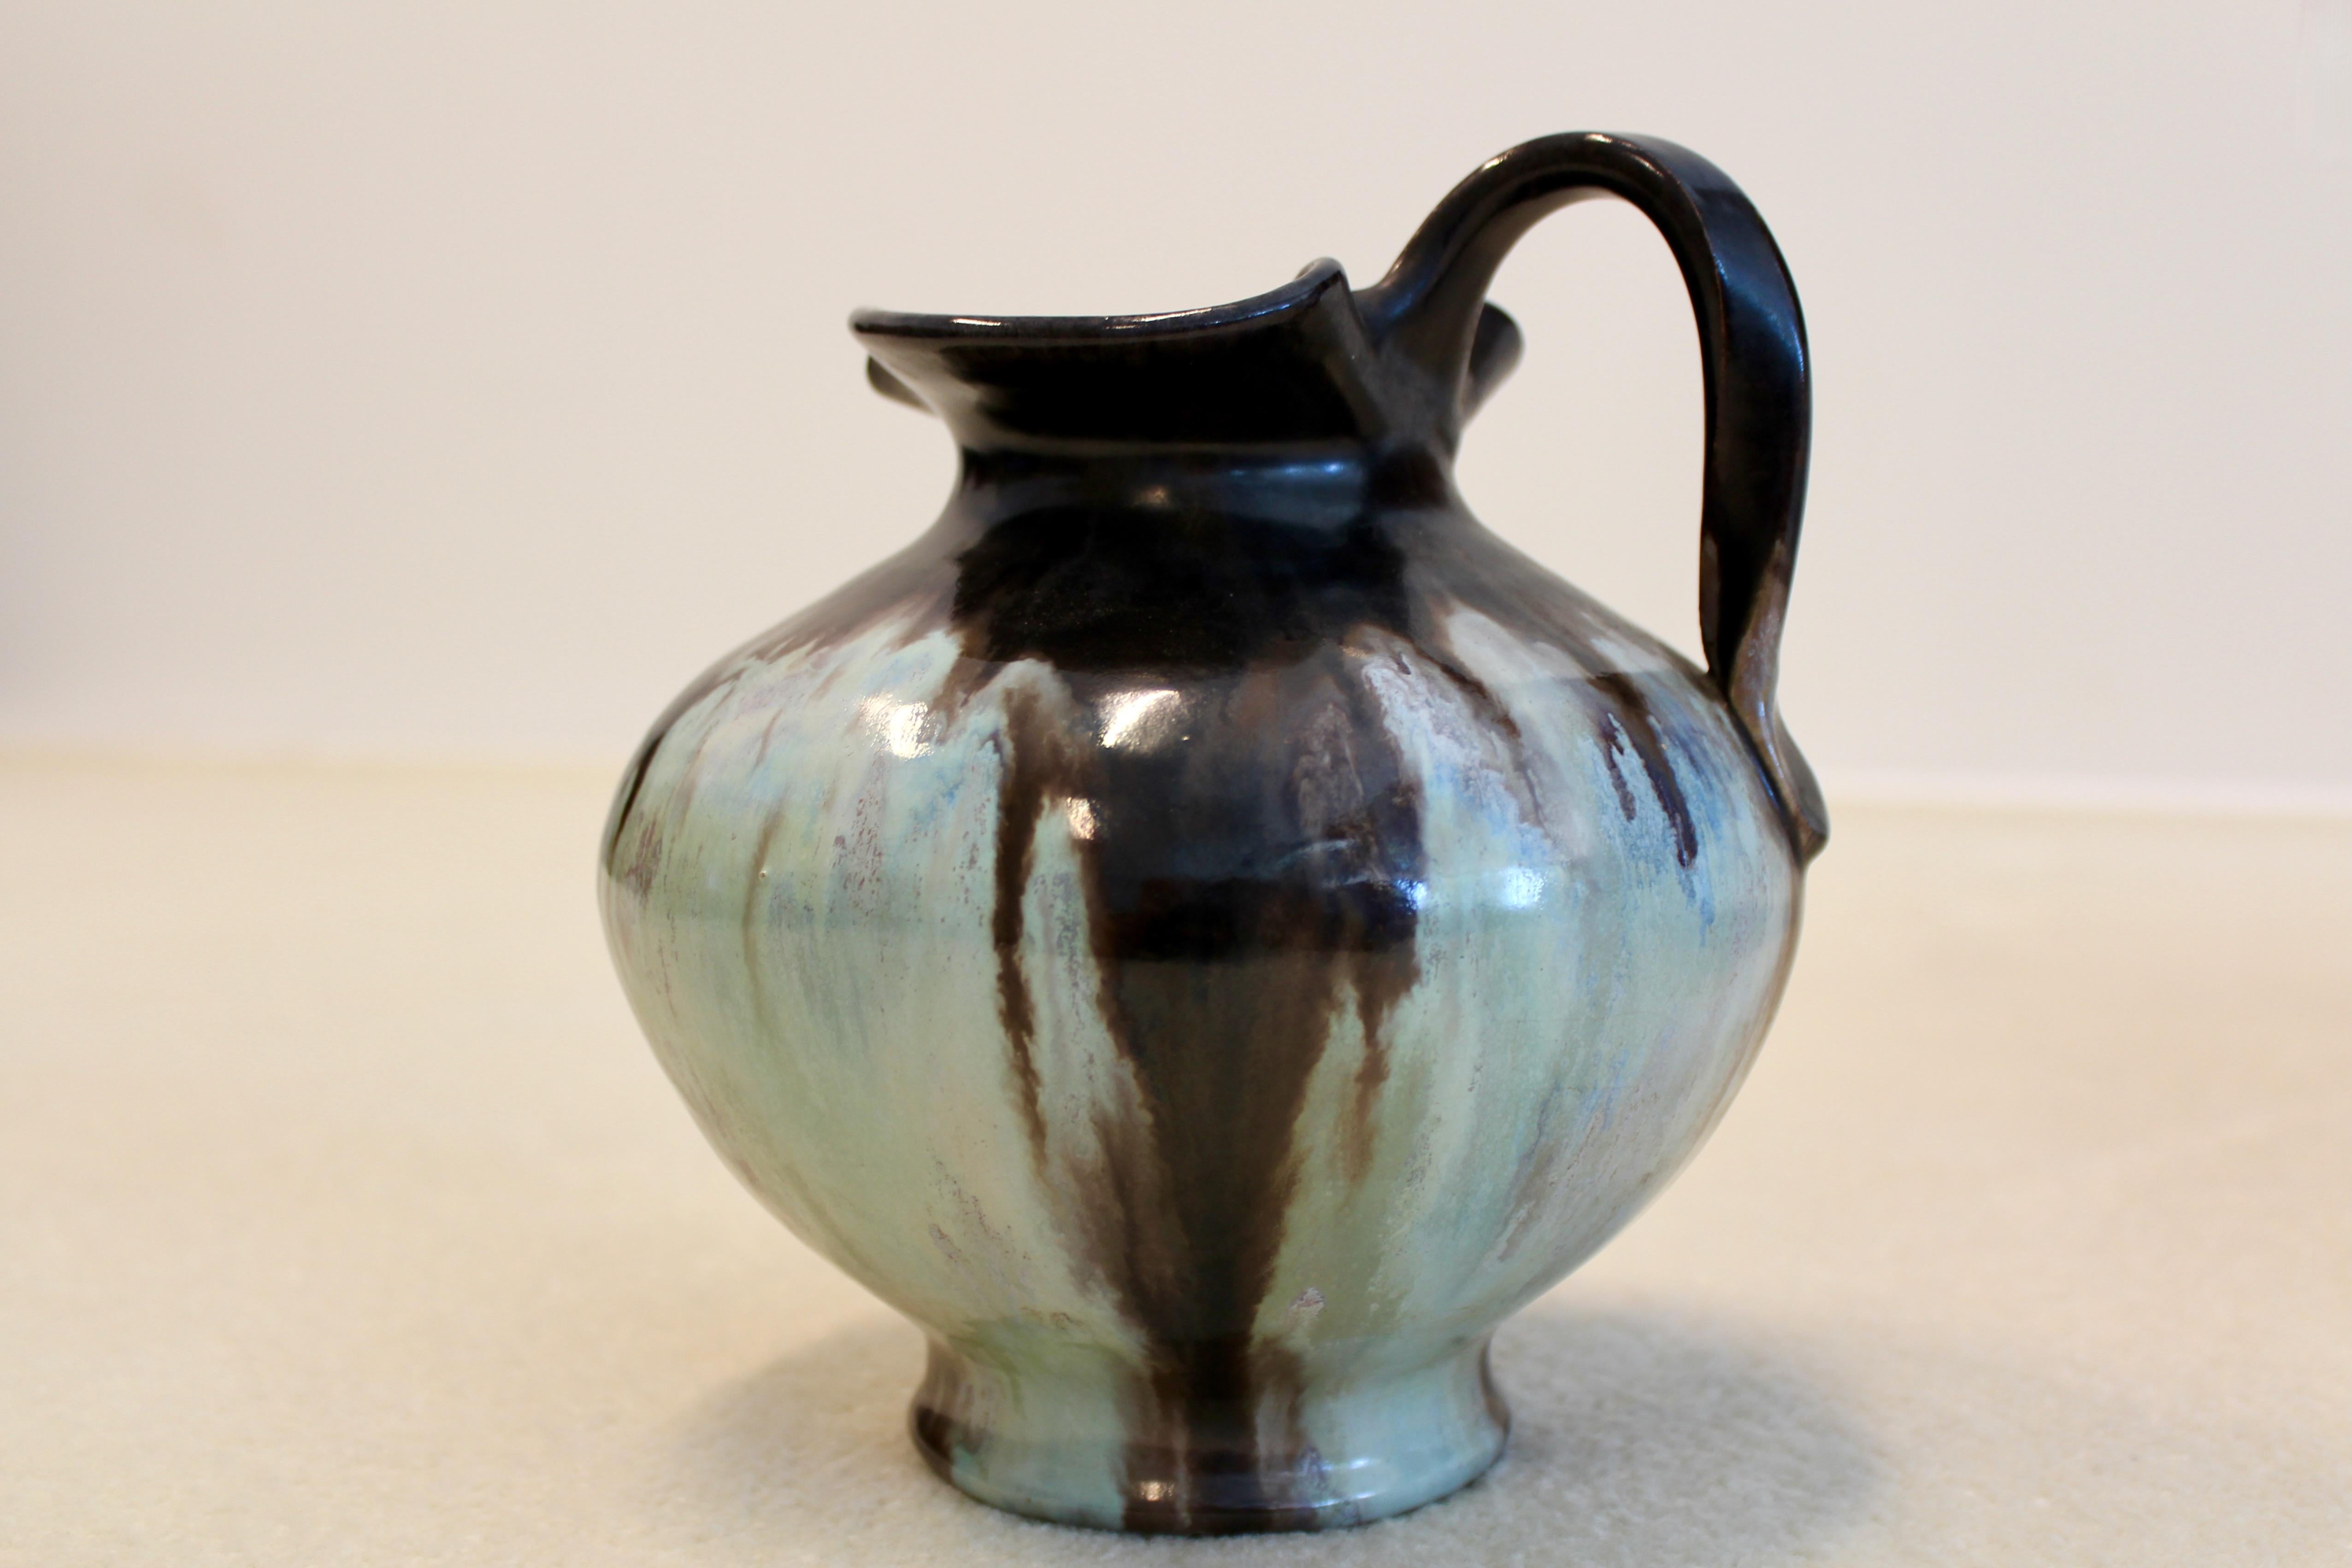 Very sophisticated ceramic jug designed and made by Klaas Mobach for ‘Mobach Utrecht’ in the 1940s with black and blue reduced fired glaze. Execution Mobach, Utrecht / the Netherlands ca.1940
The jug is signed on the bottom side: signature stamped